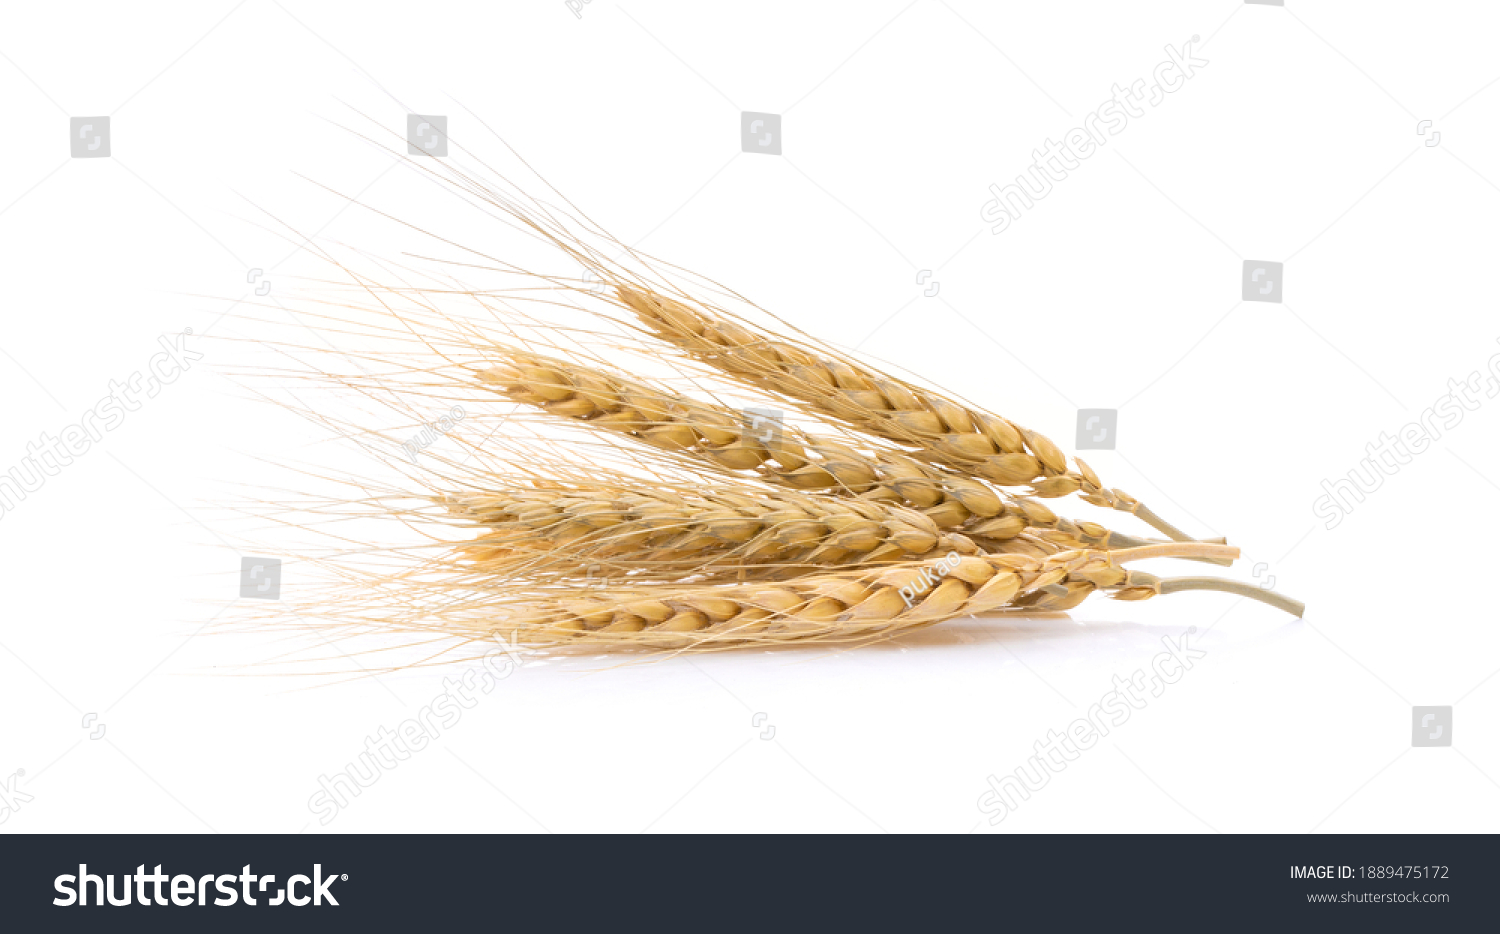 barley grains isolated on white background #1889475172